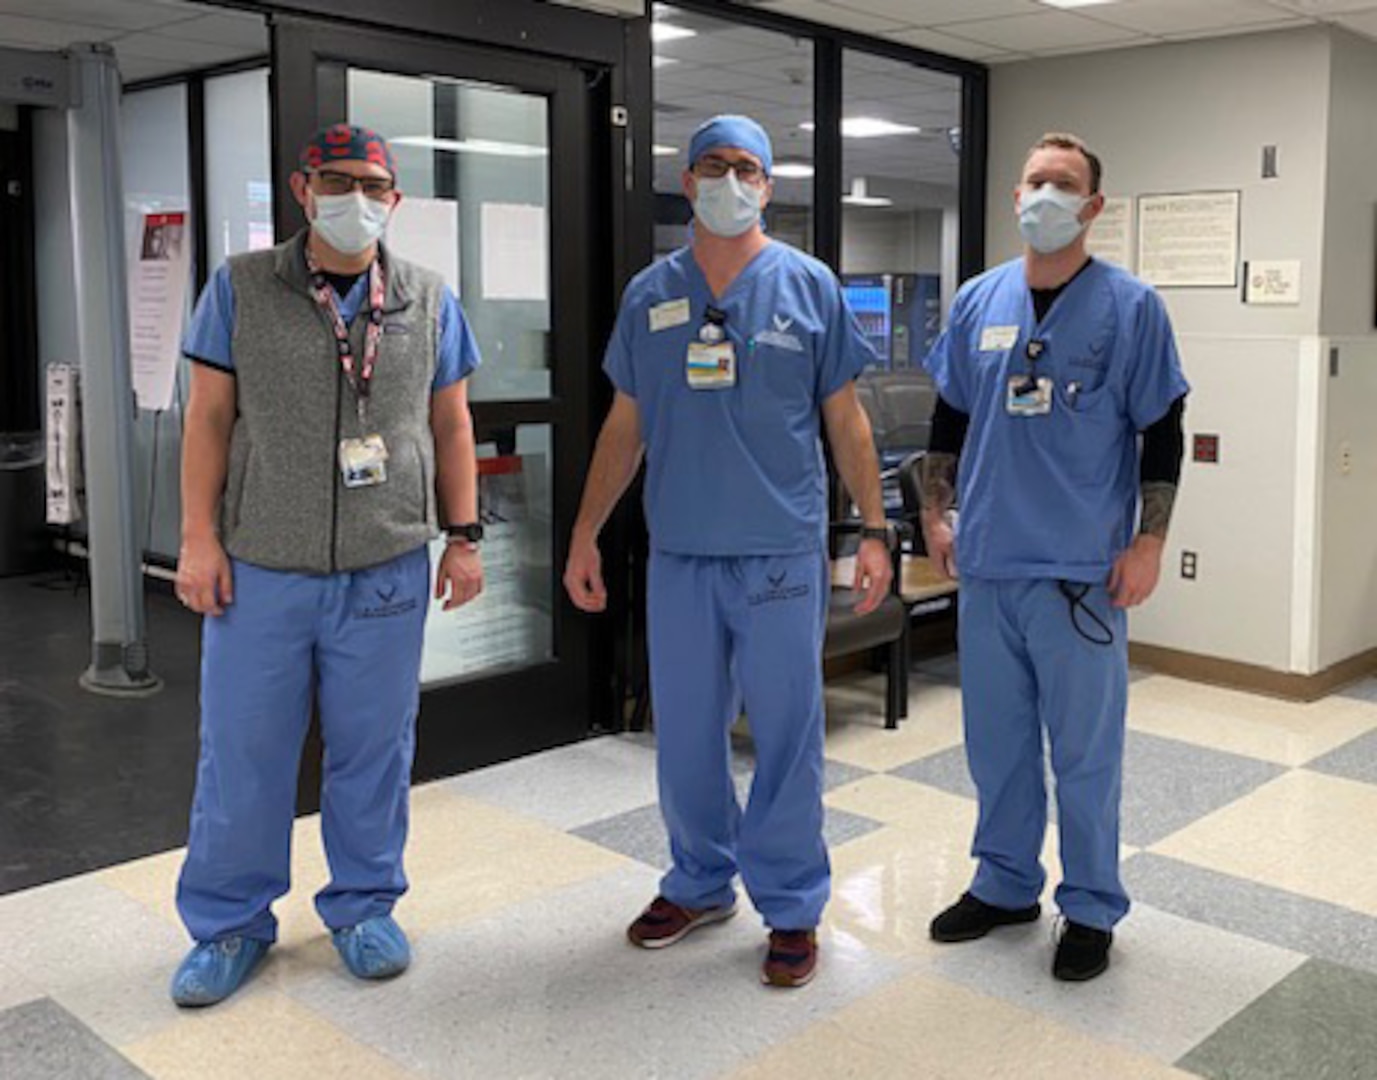 Healthcare workers at the Vanderbilt University Medical Center in Nashville, Tennessee, wearing scrubs that were donated two weeks ago by Air Force Recruiting Service recruiters.